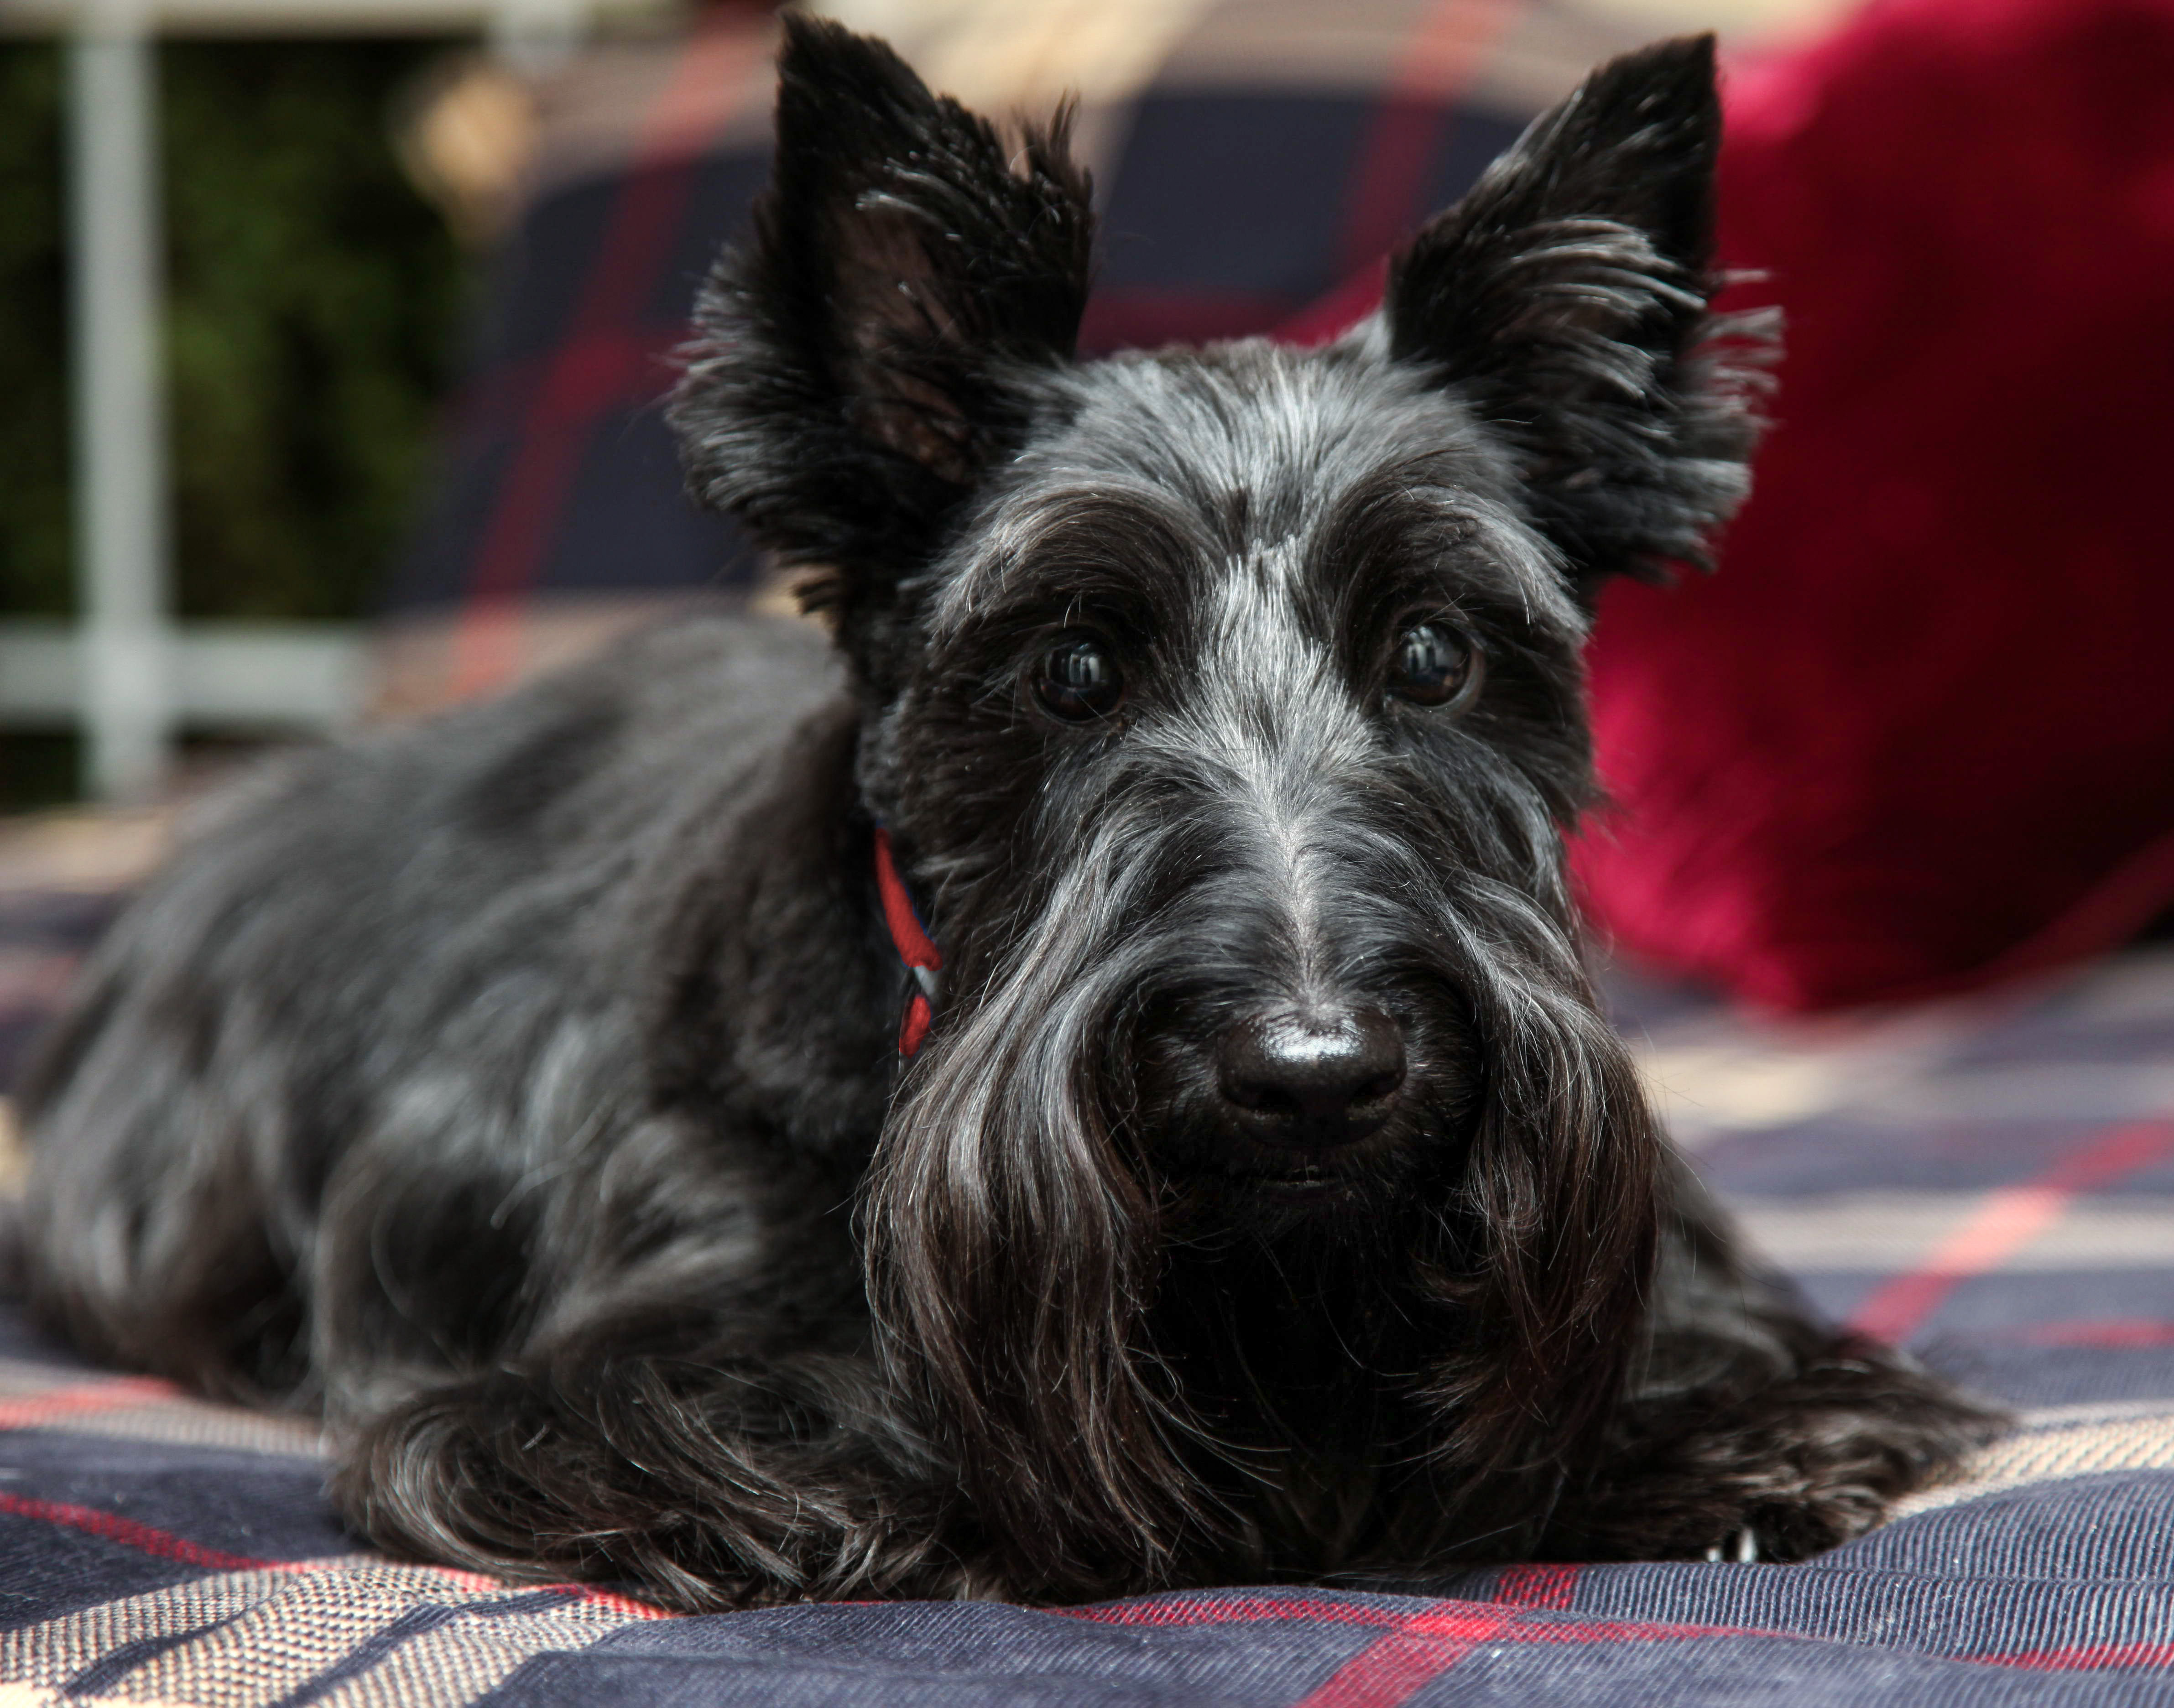 Heather Twomey the Scottish Terrier